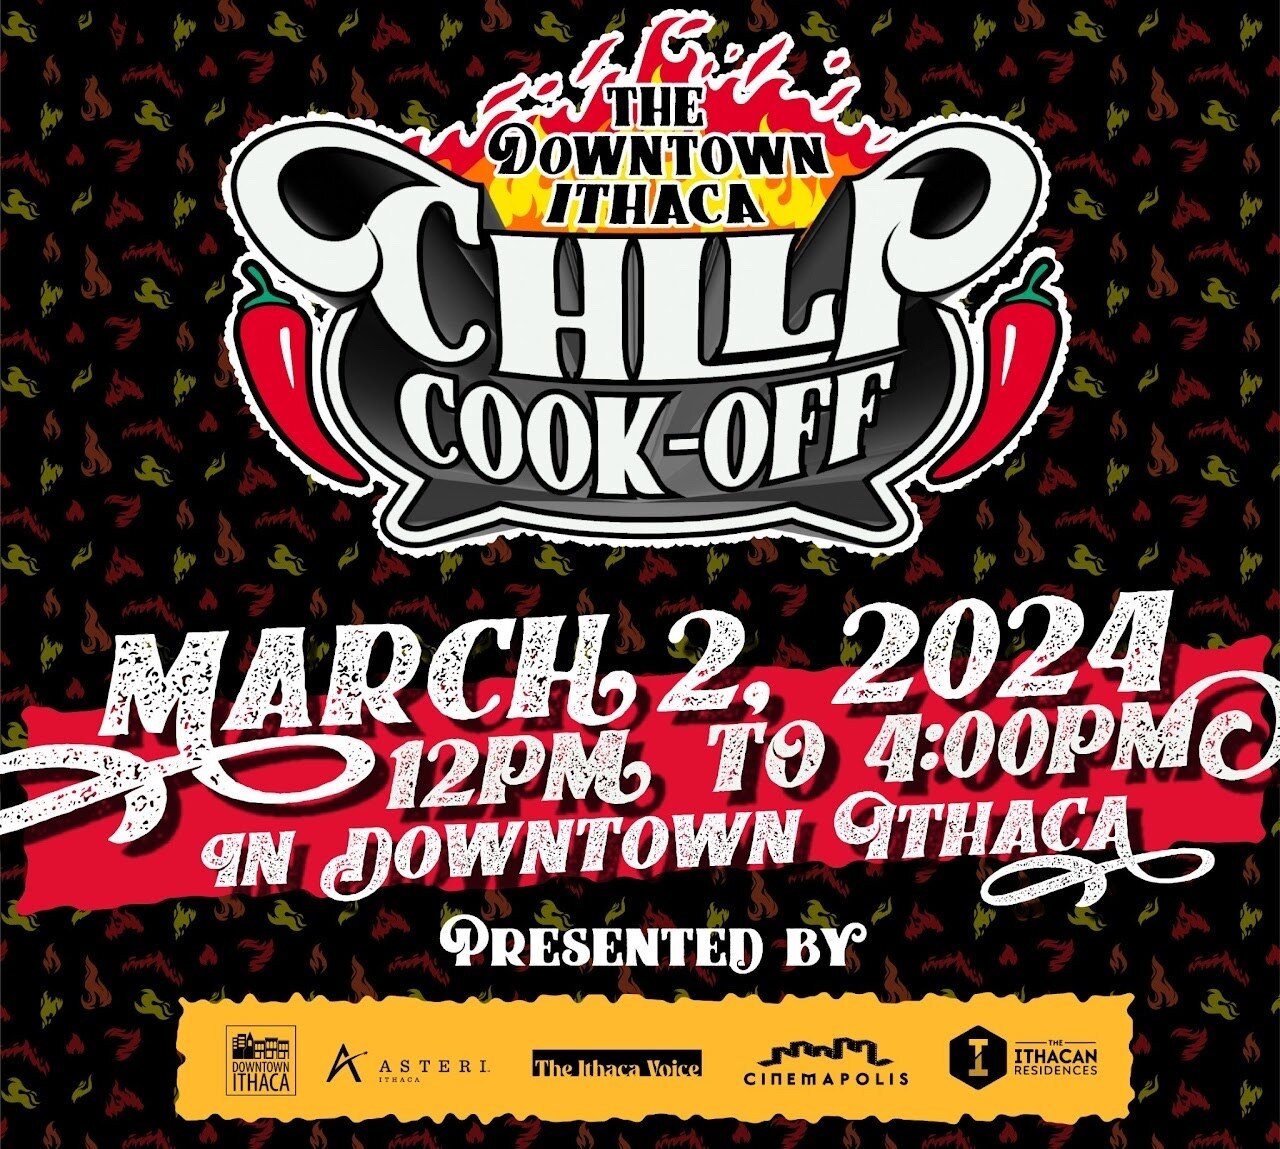 First time Competitors &amp; Silo is ready to BRING IT ON for this year's Downtown Ithaca Chili Cook-Off competition with our edgy entry:  Mr. &amp; Mrs. Tenorman Chili.  #IYKYK. ⁠
⁠
Our entry will be Silo's smoked chicken and hominy chili over a hon